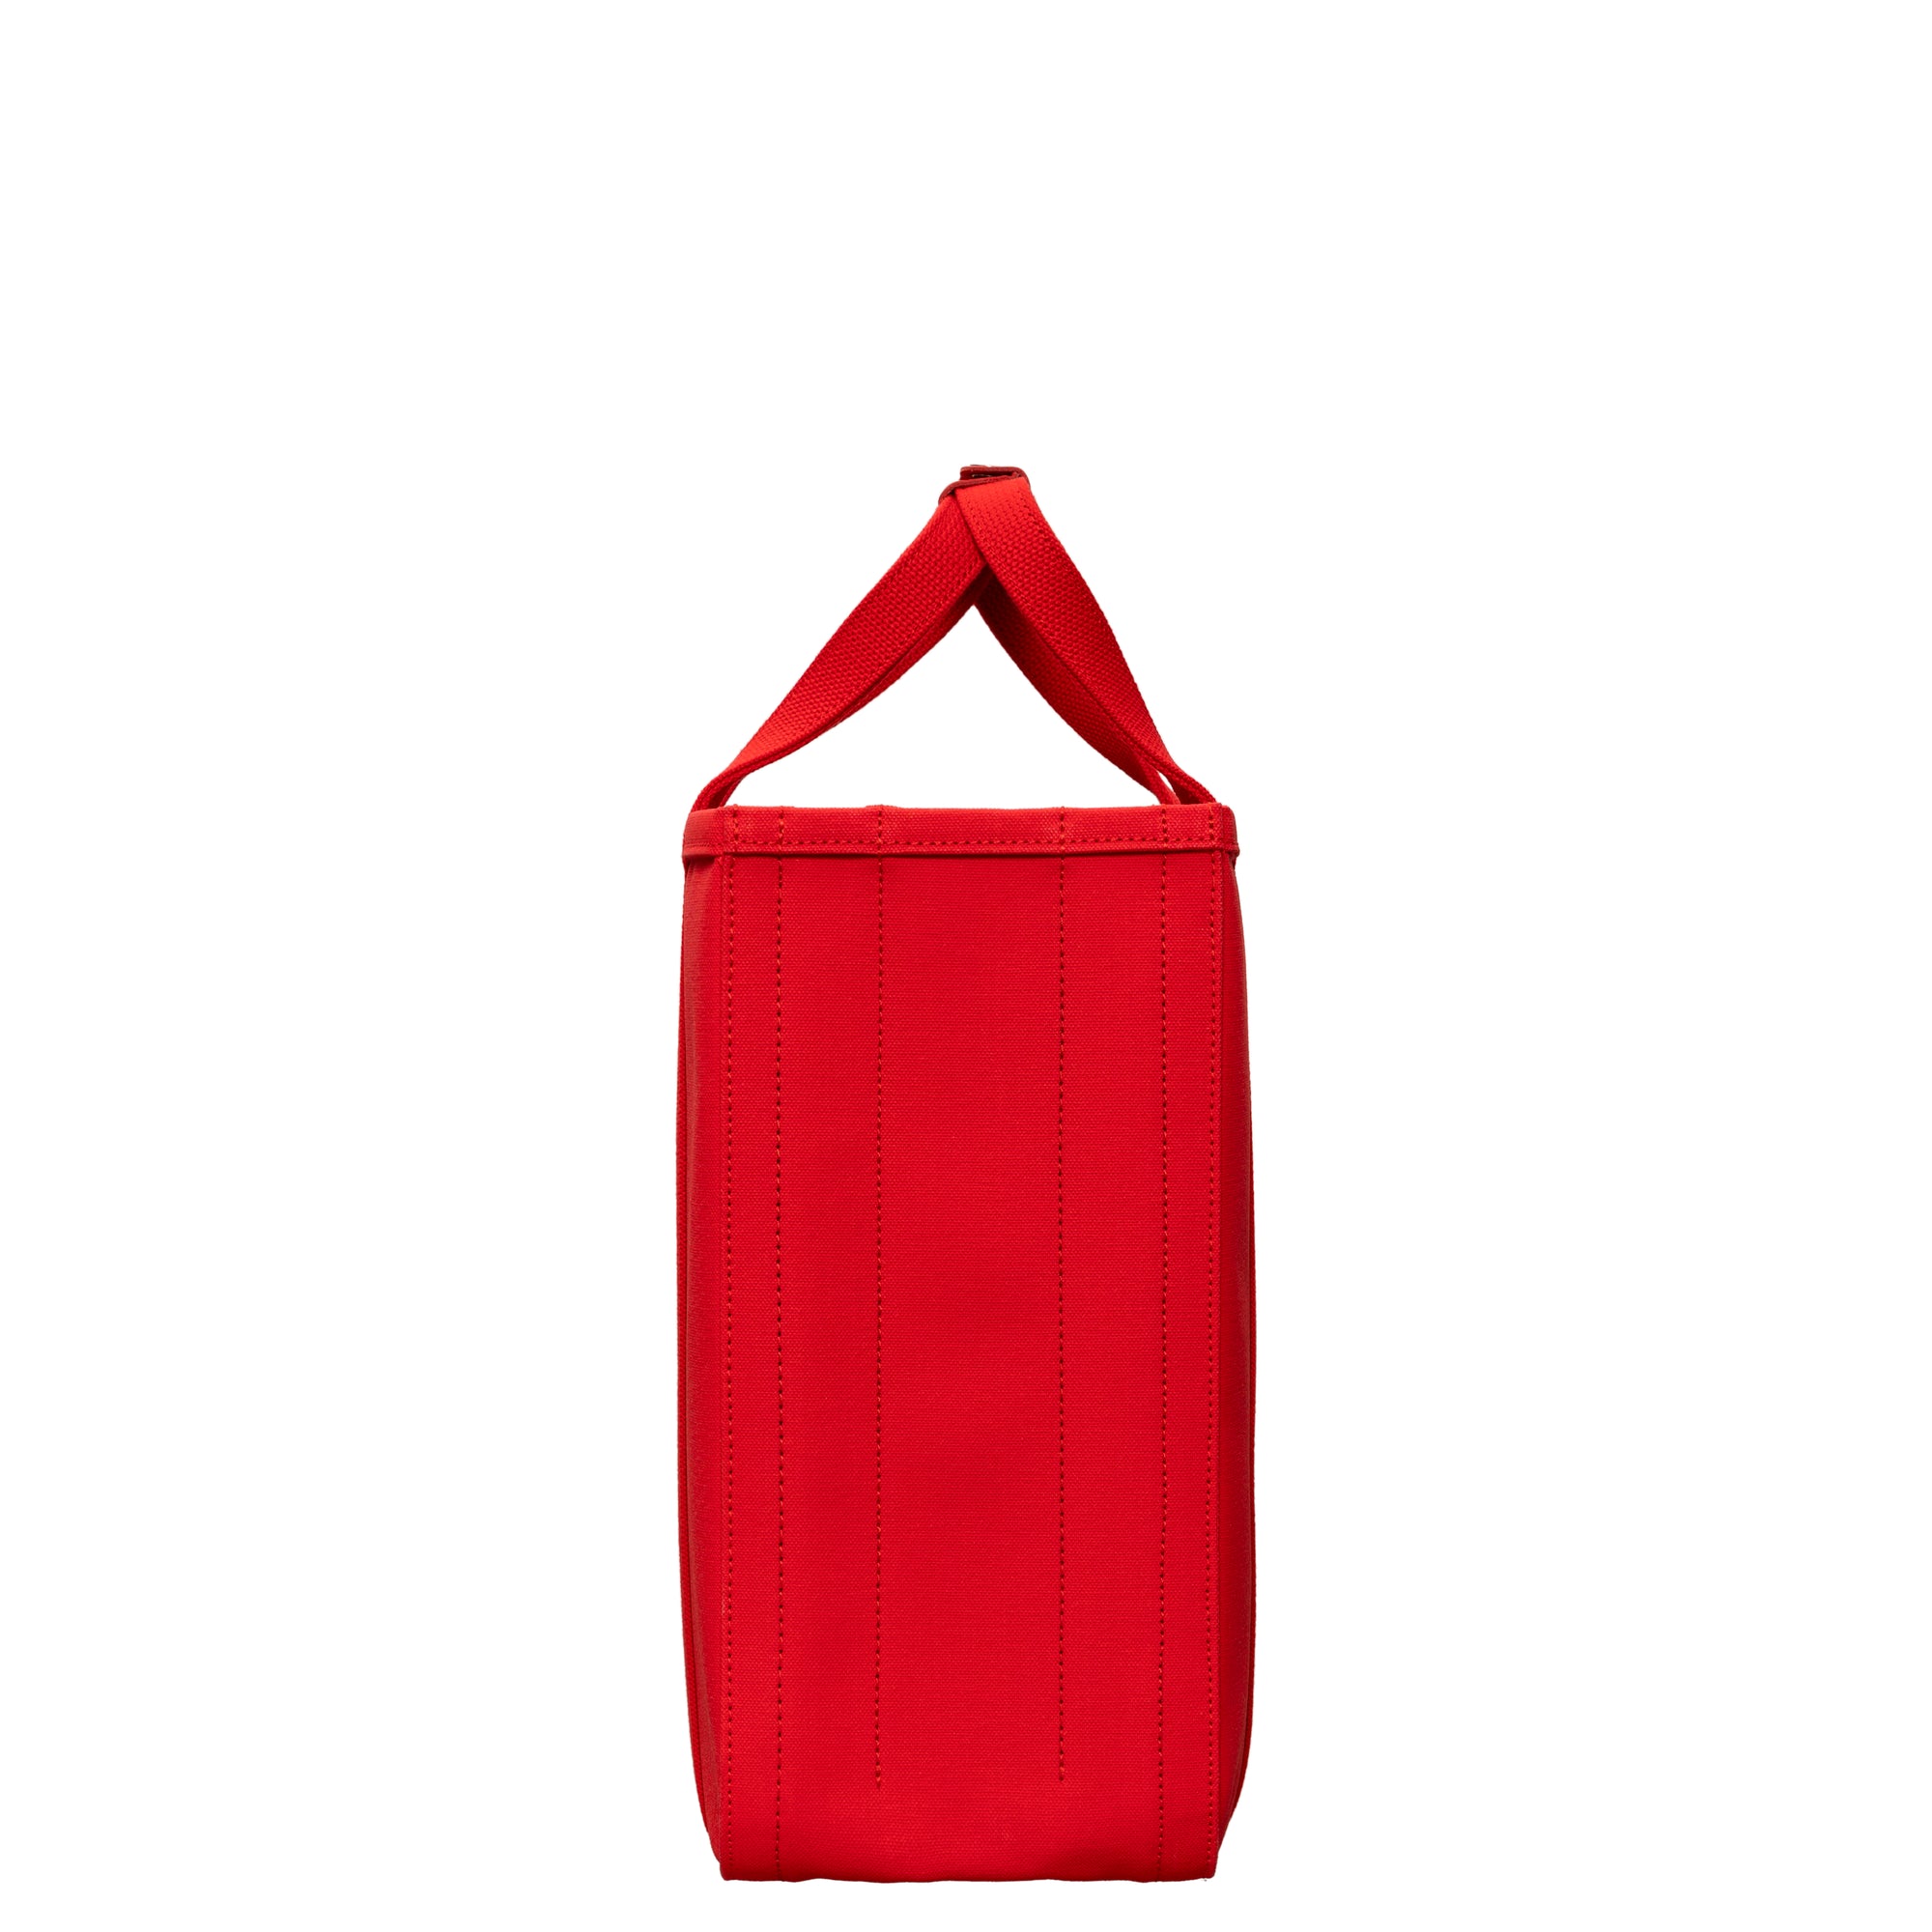 CHACOLI - 01 TOTE W400 X H380 X D180 - (RED) view 2